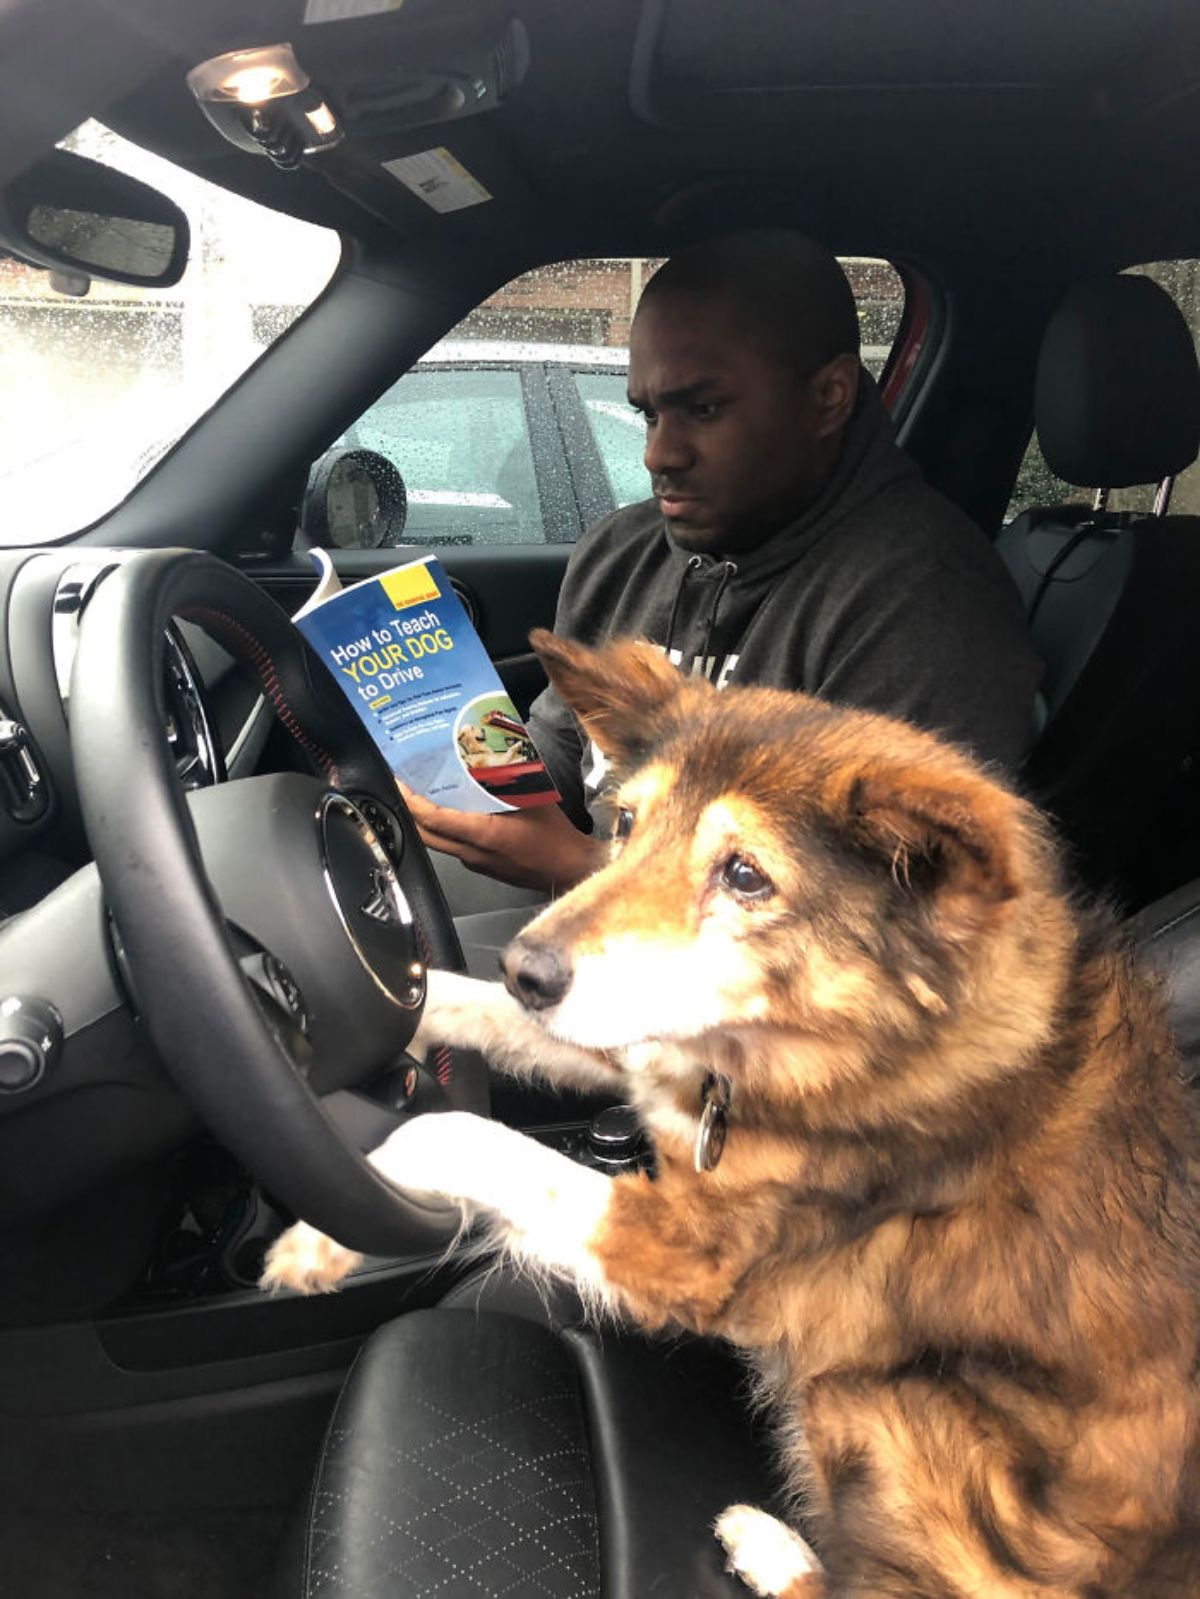 fluffy brown and white dog sitting at a steering wheel next to a man holding a book called How to Teach YOUR DOG to Drive